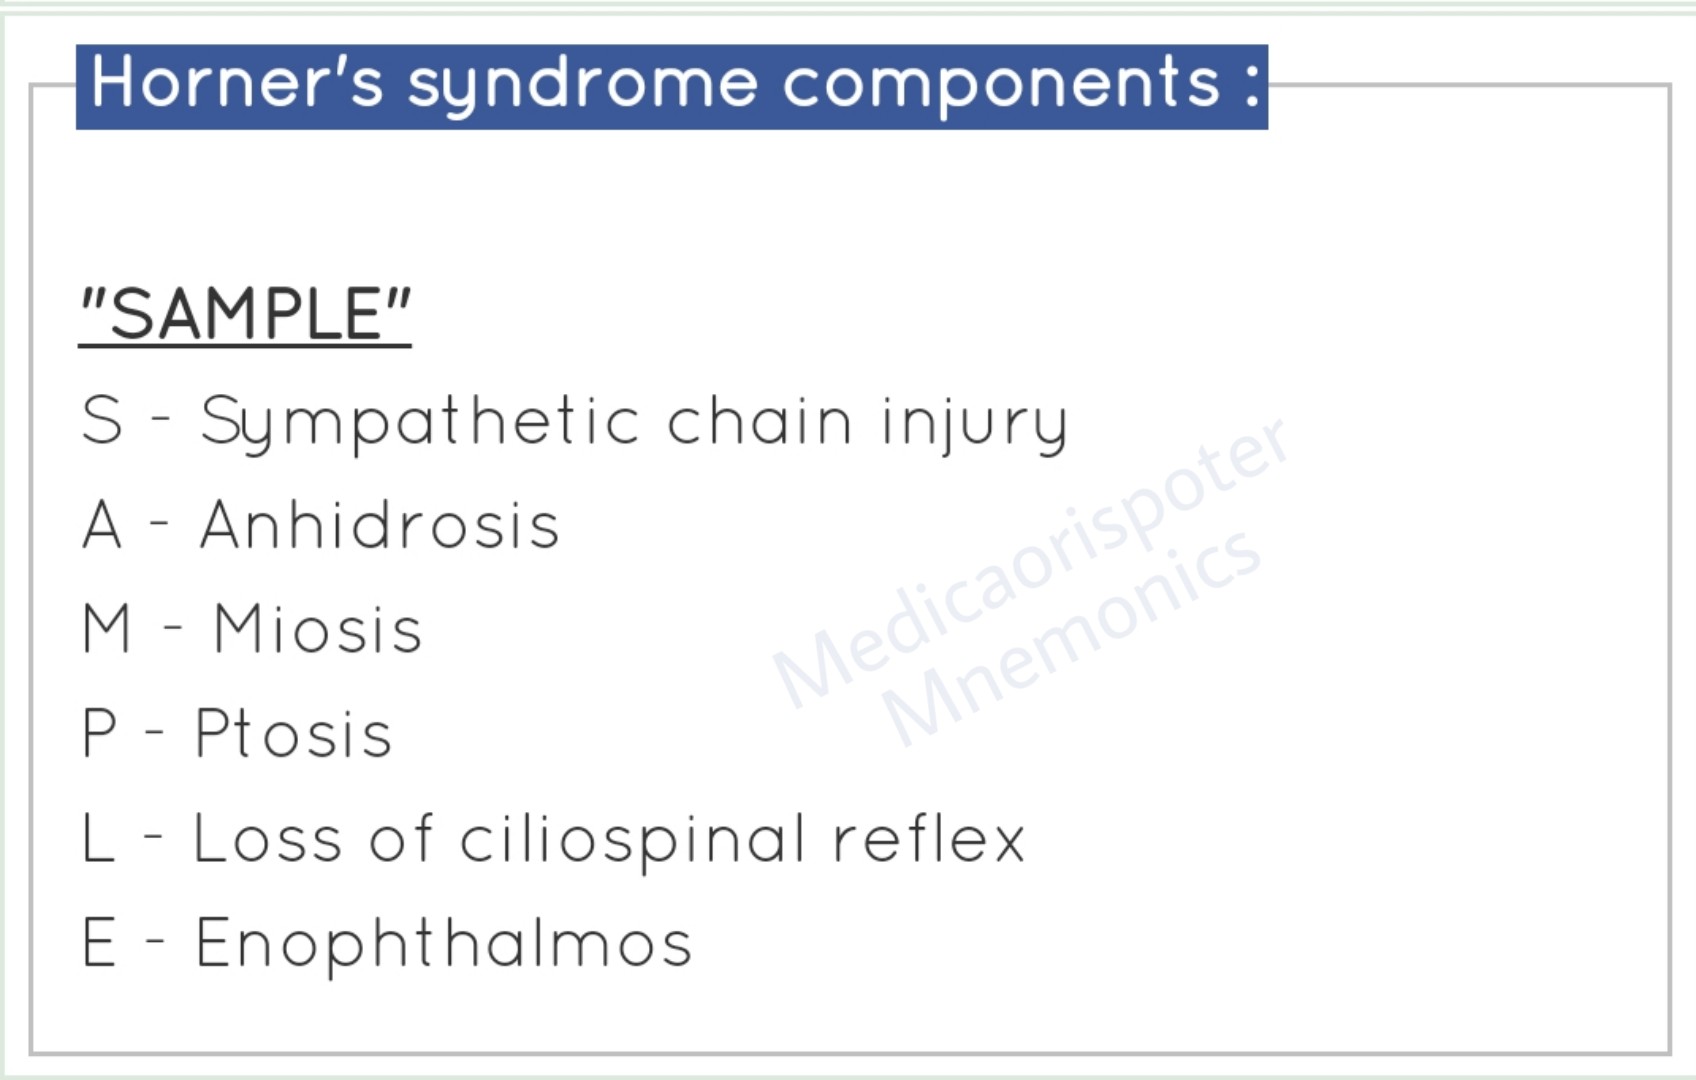 Horners Syndrome Components